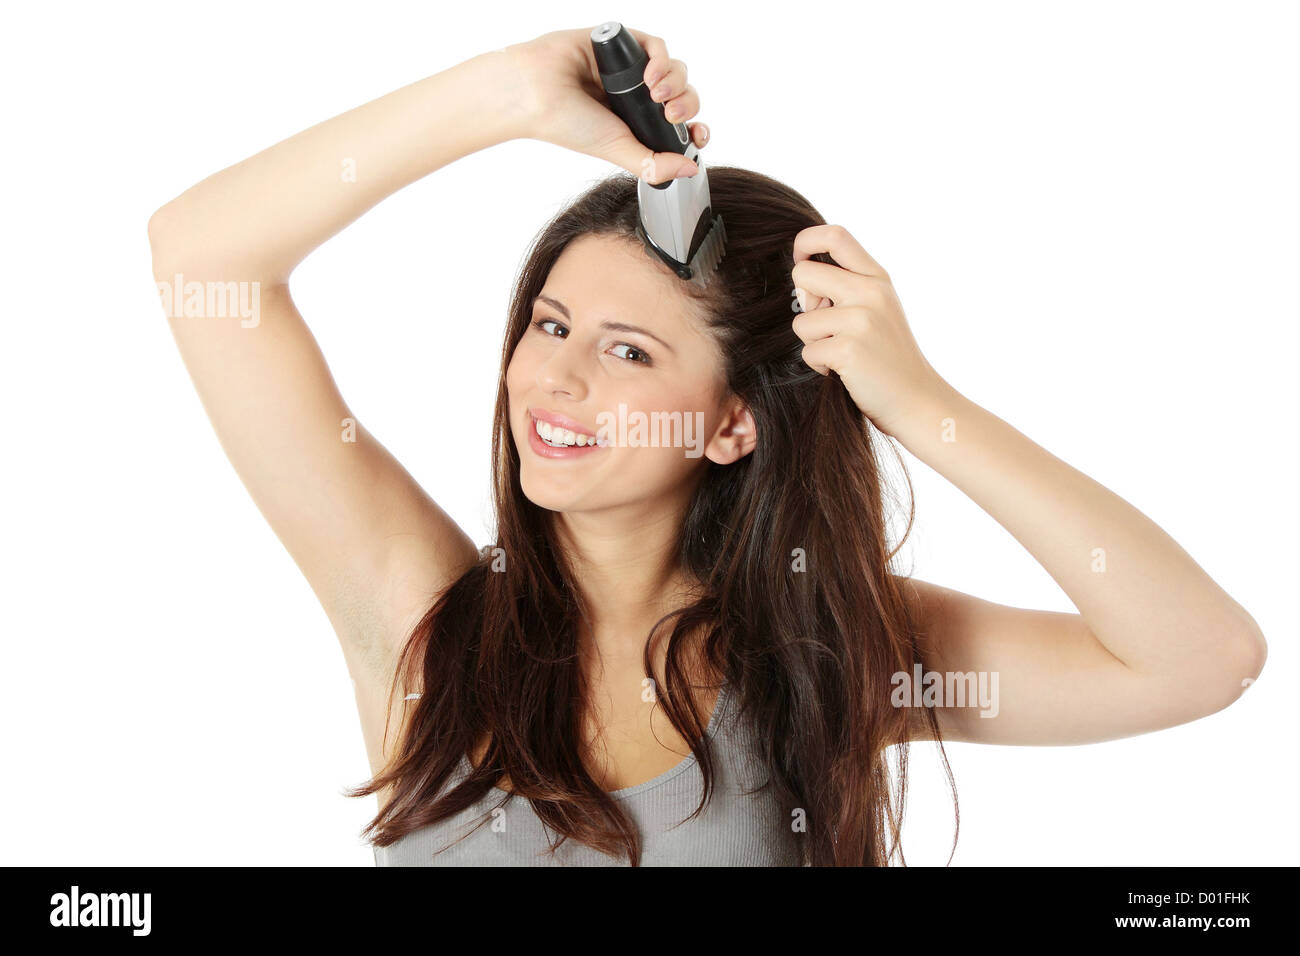 how to use clippers on a woman's hair